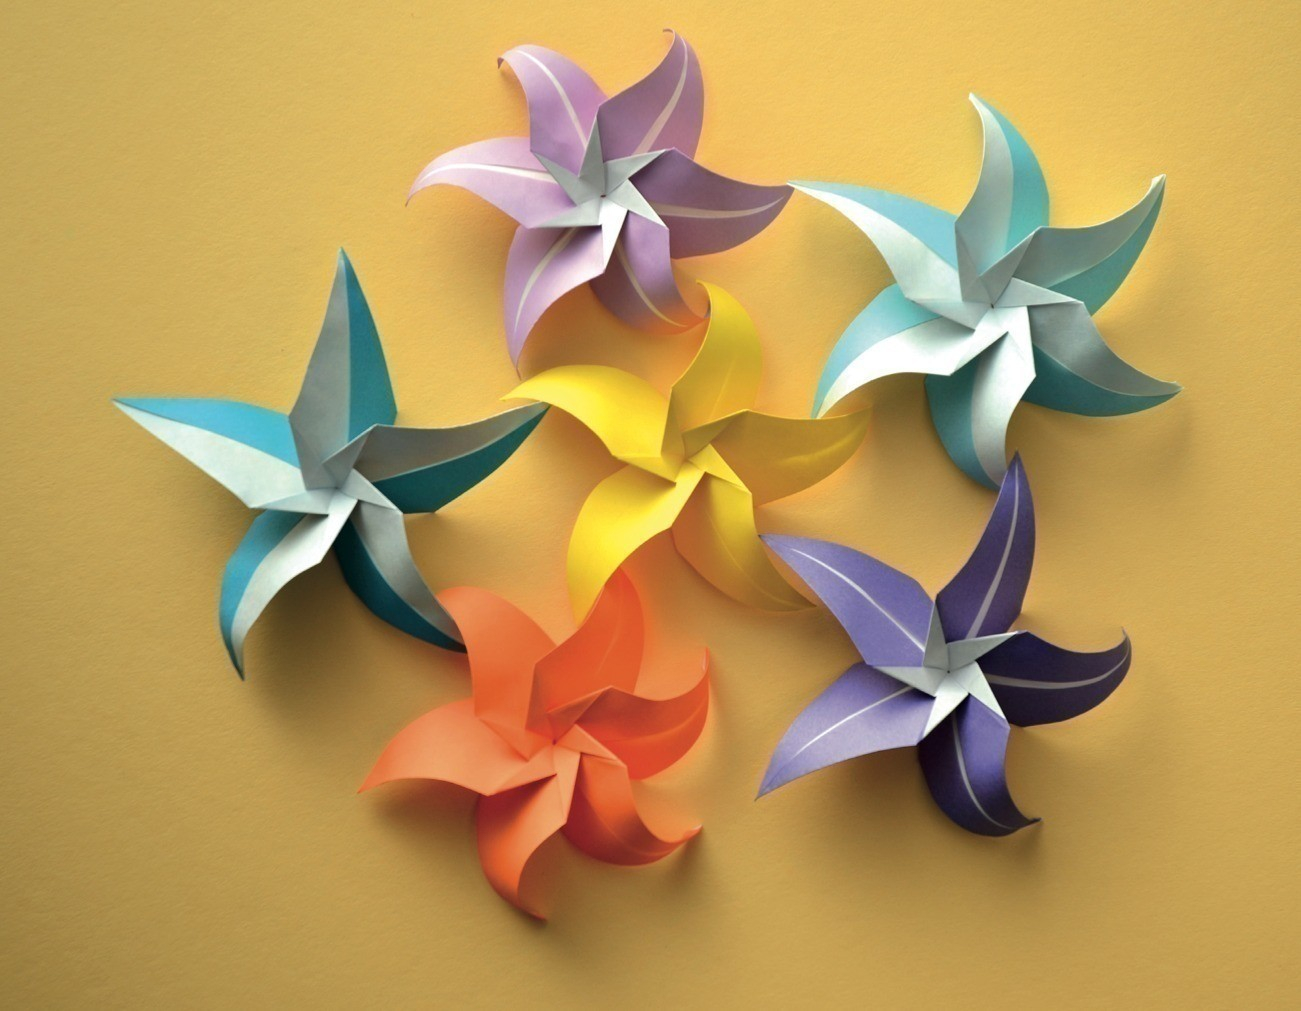 How To Make Flowers With Origami Star Flowers Extract From Lafosse Alexanders Origami Flowers